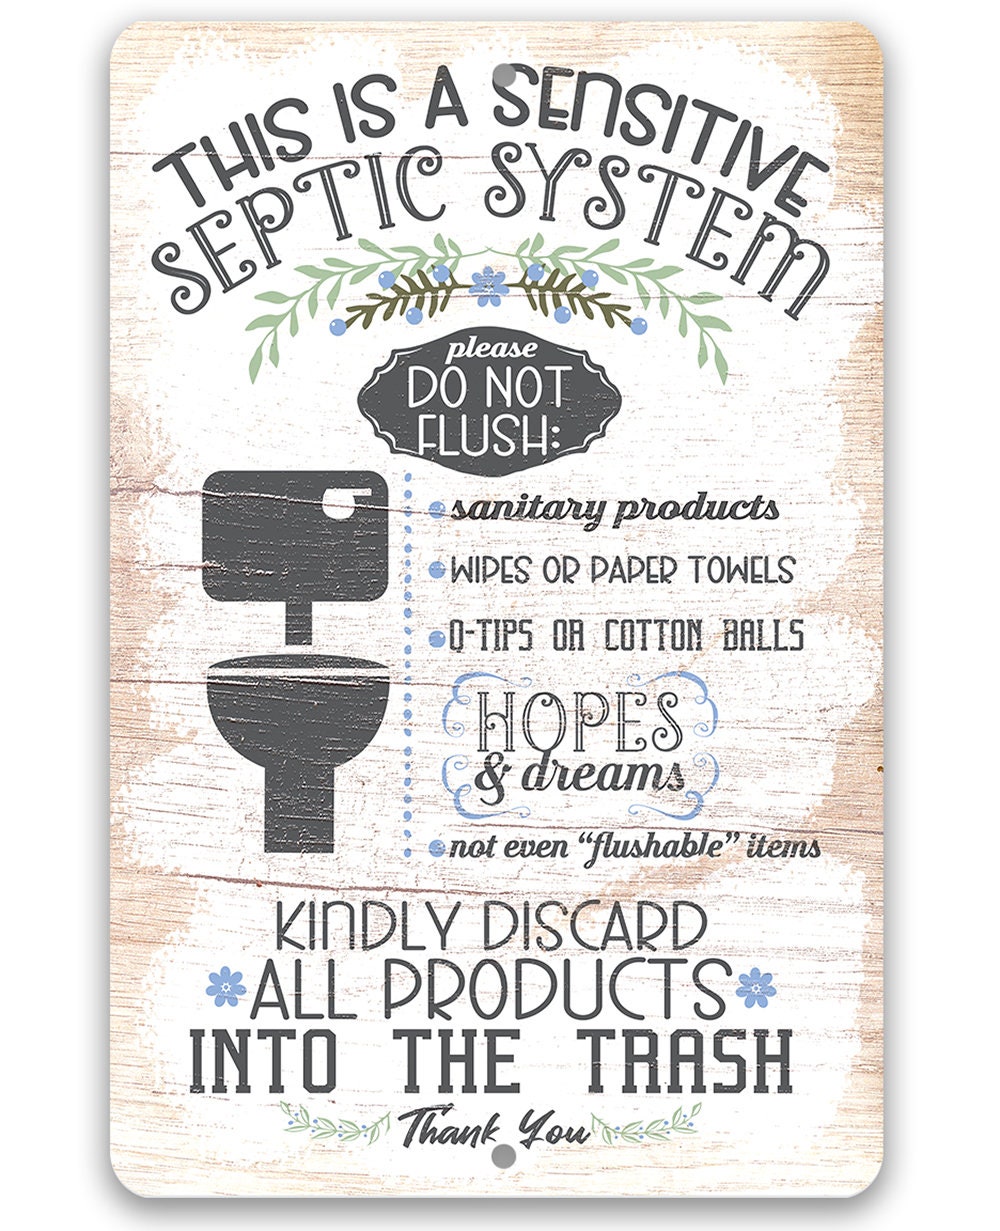 This Is A Sensitive Septic System - Metal Sign Metal Sign Lone Star Art 